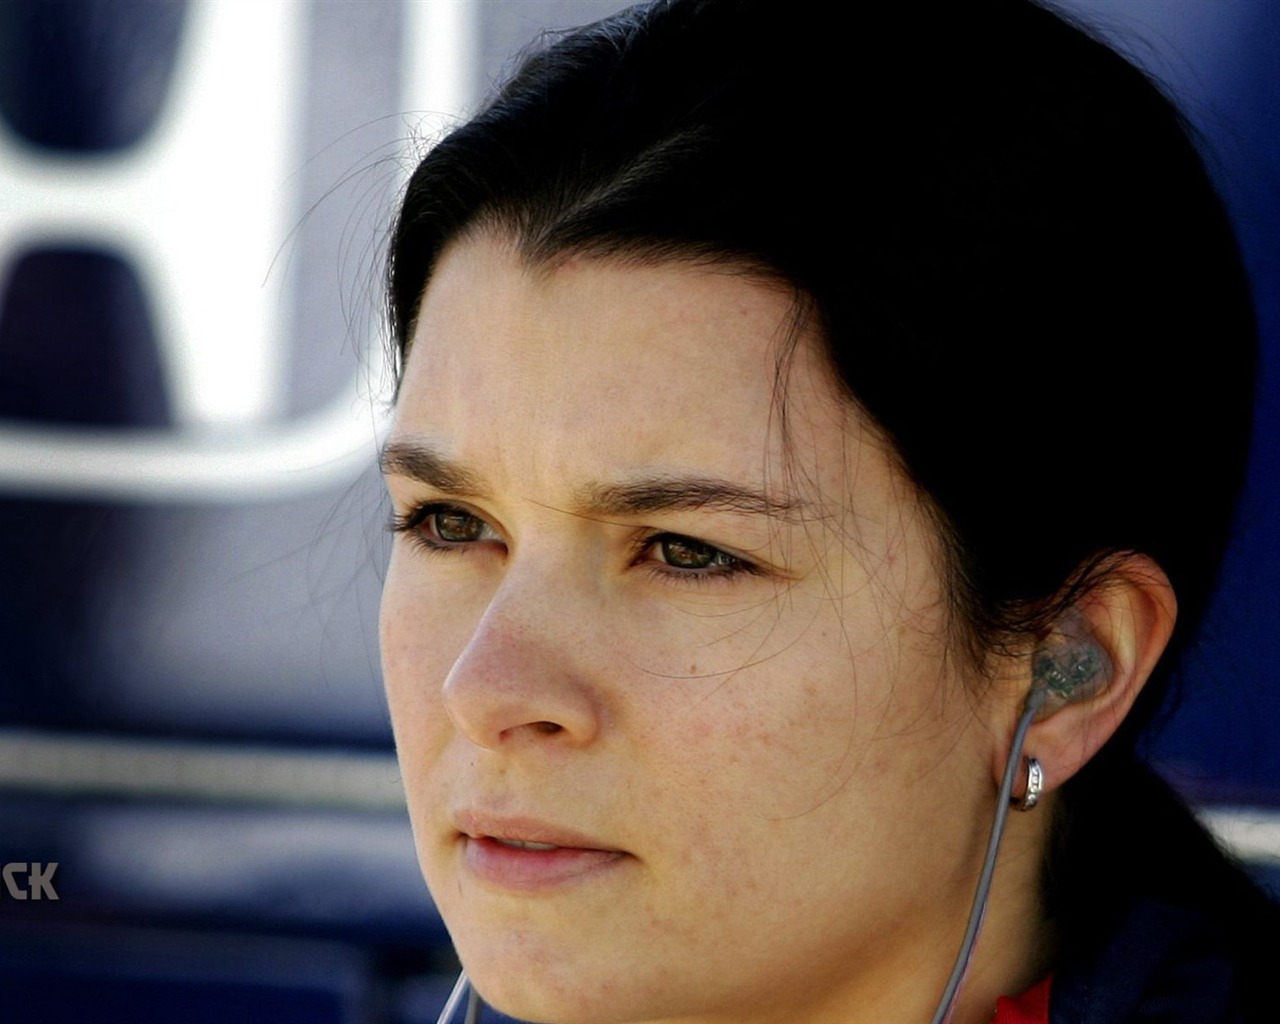 Danica Patrick #007 - 1280x1024 Wallpapers Pictures Photos Images